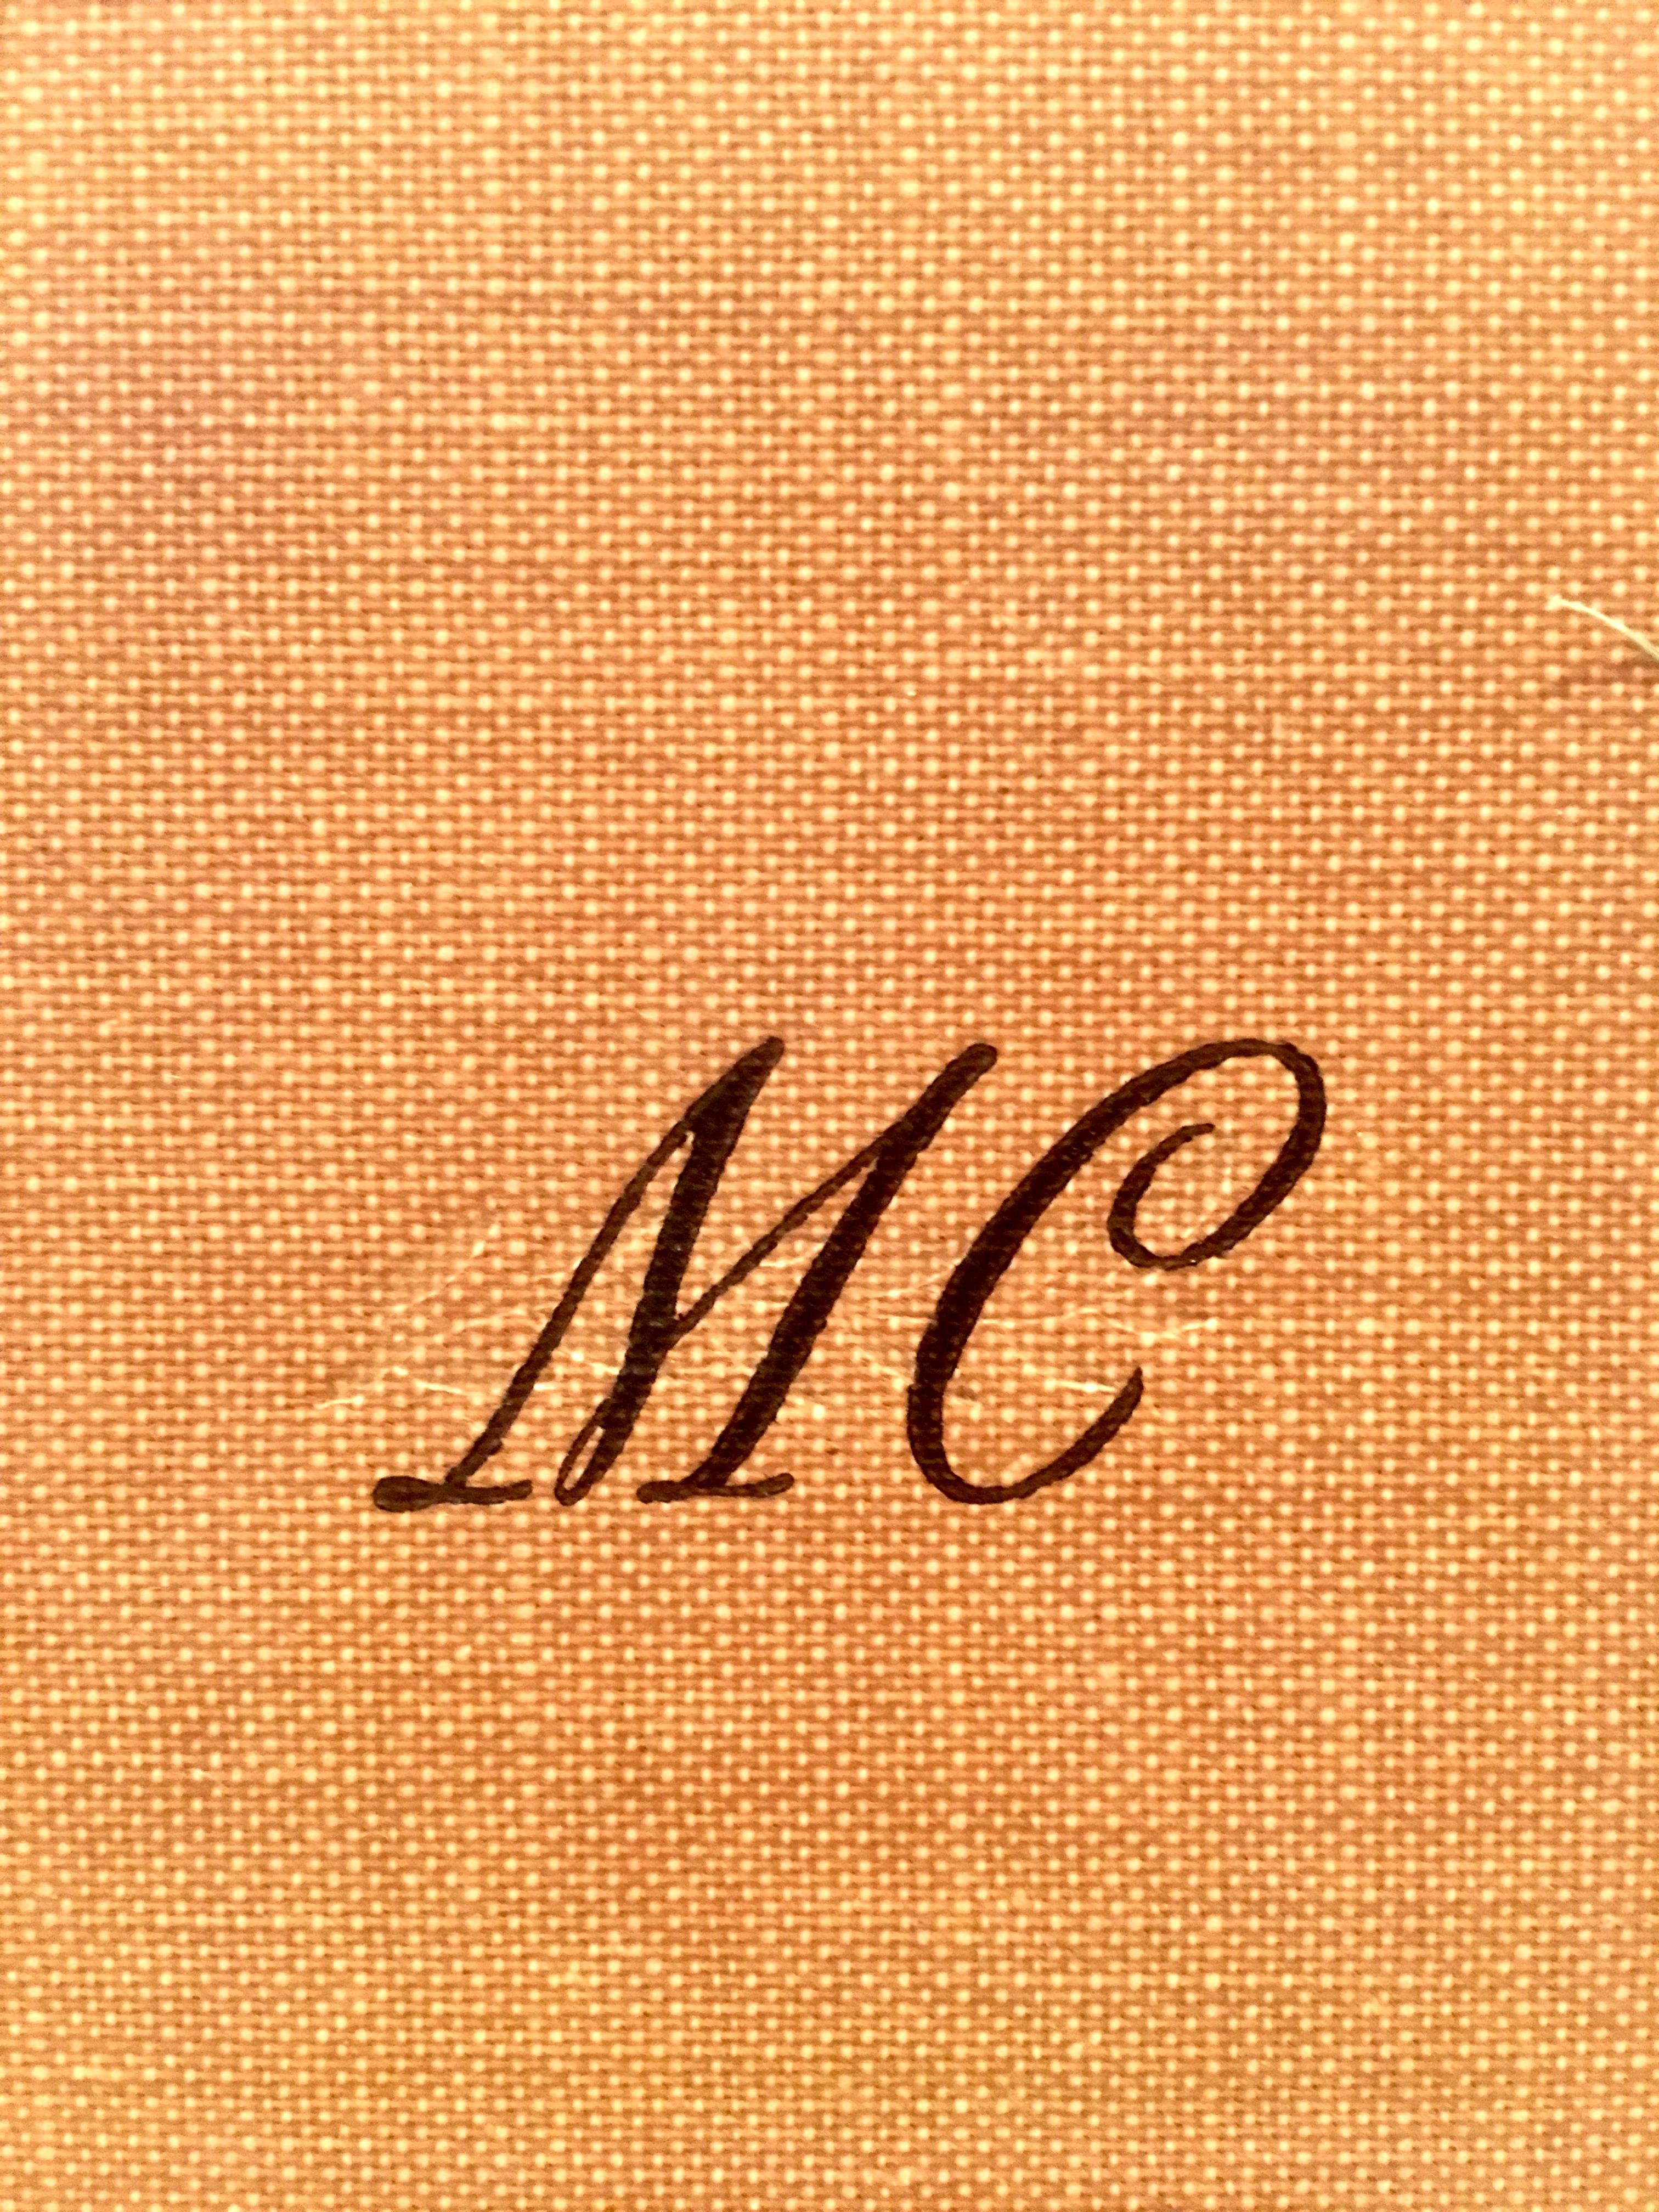 Fabric 1937 First Edition Book 